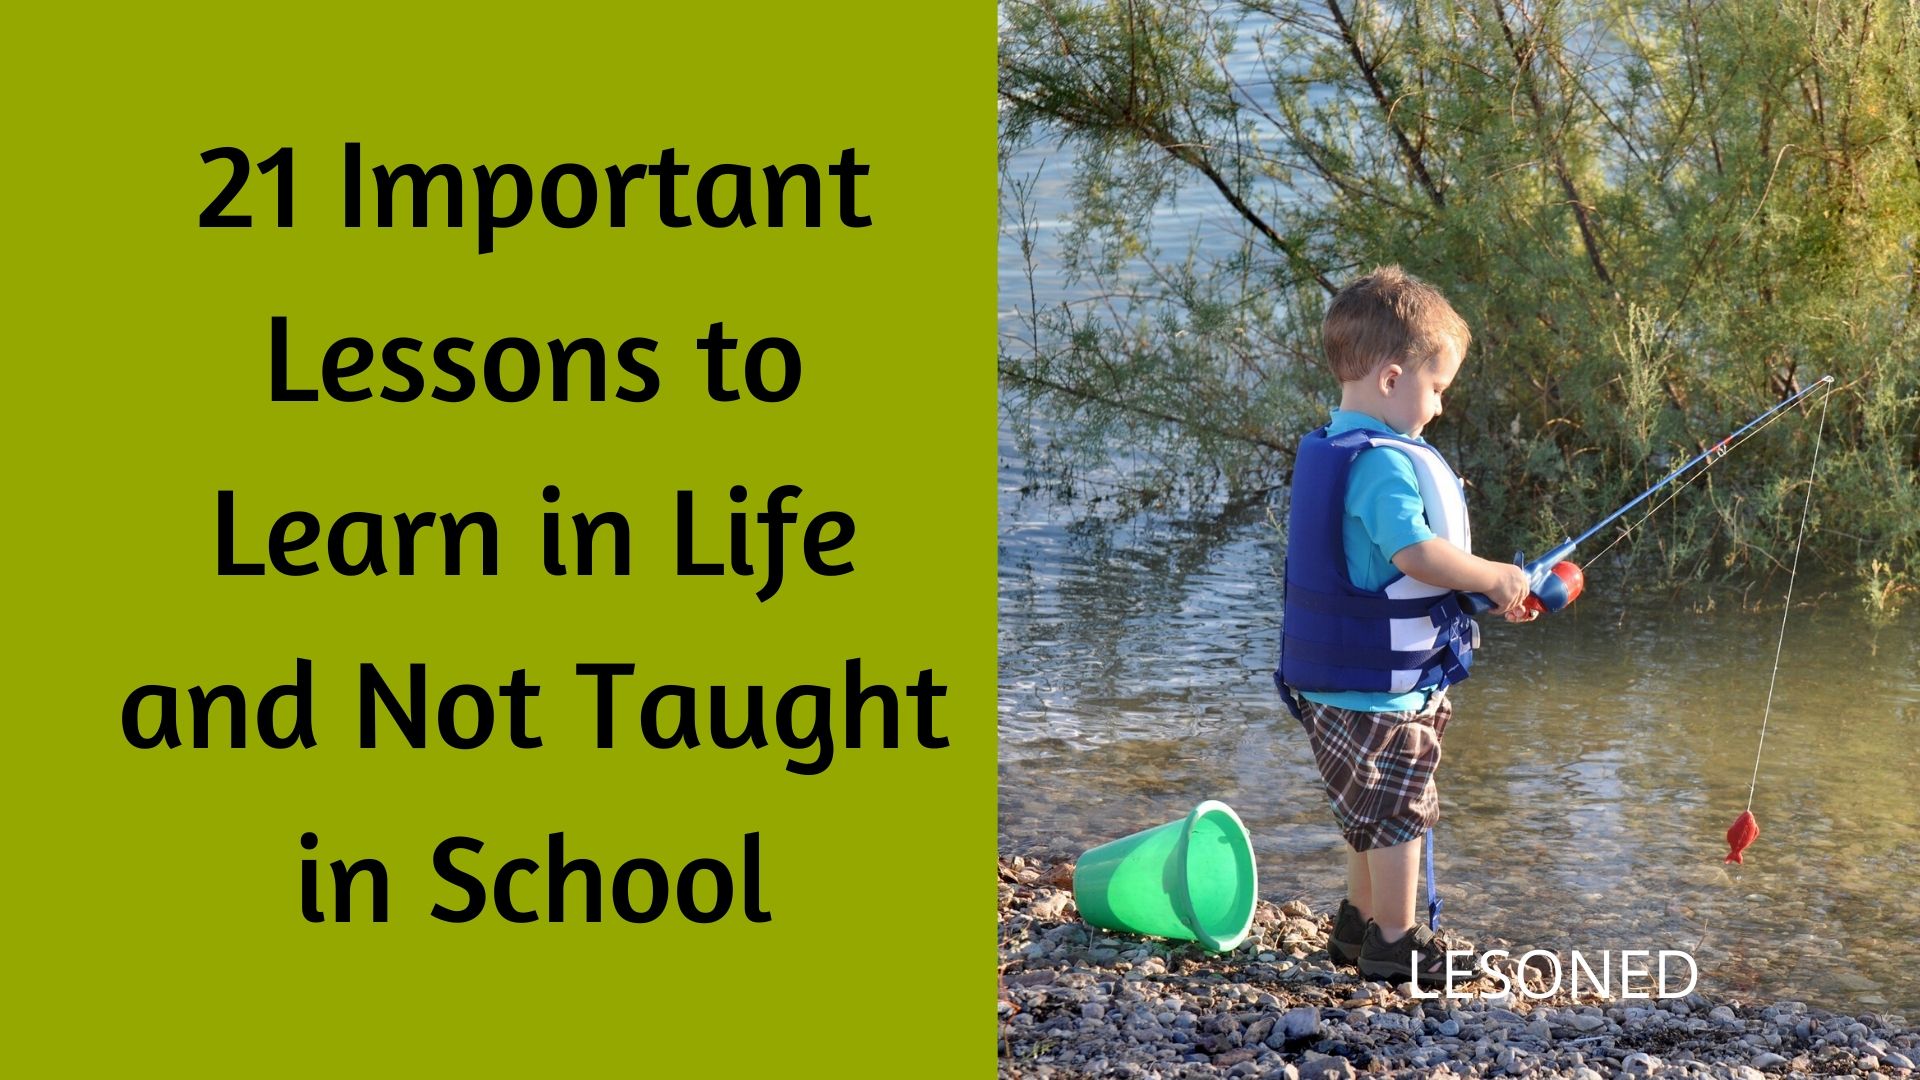 21 important life lessons not taught in school that you should learn